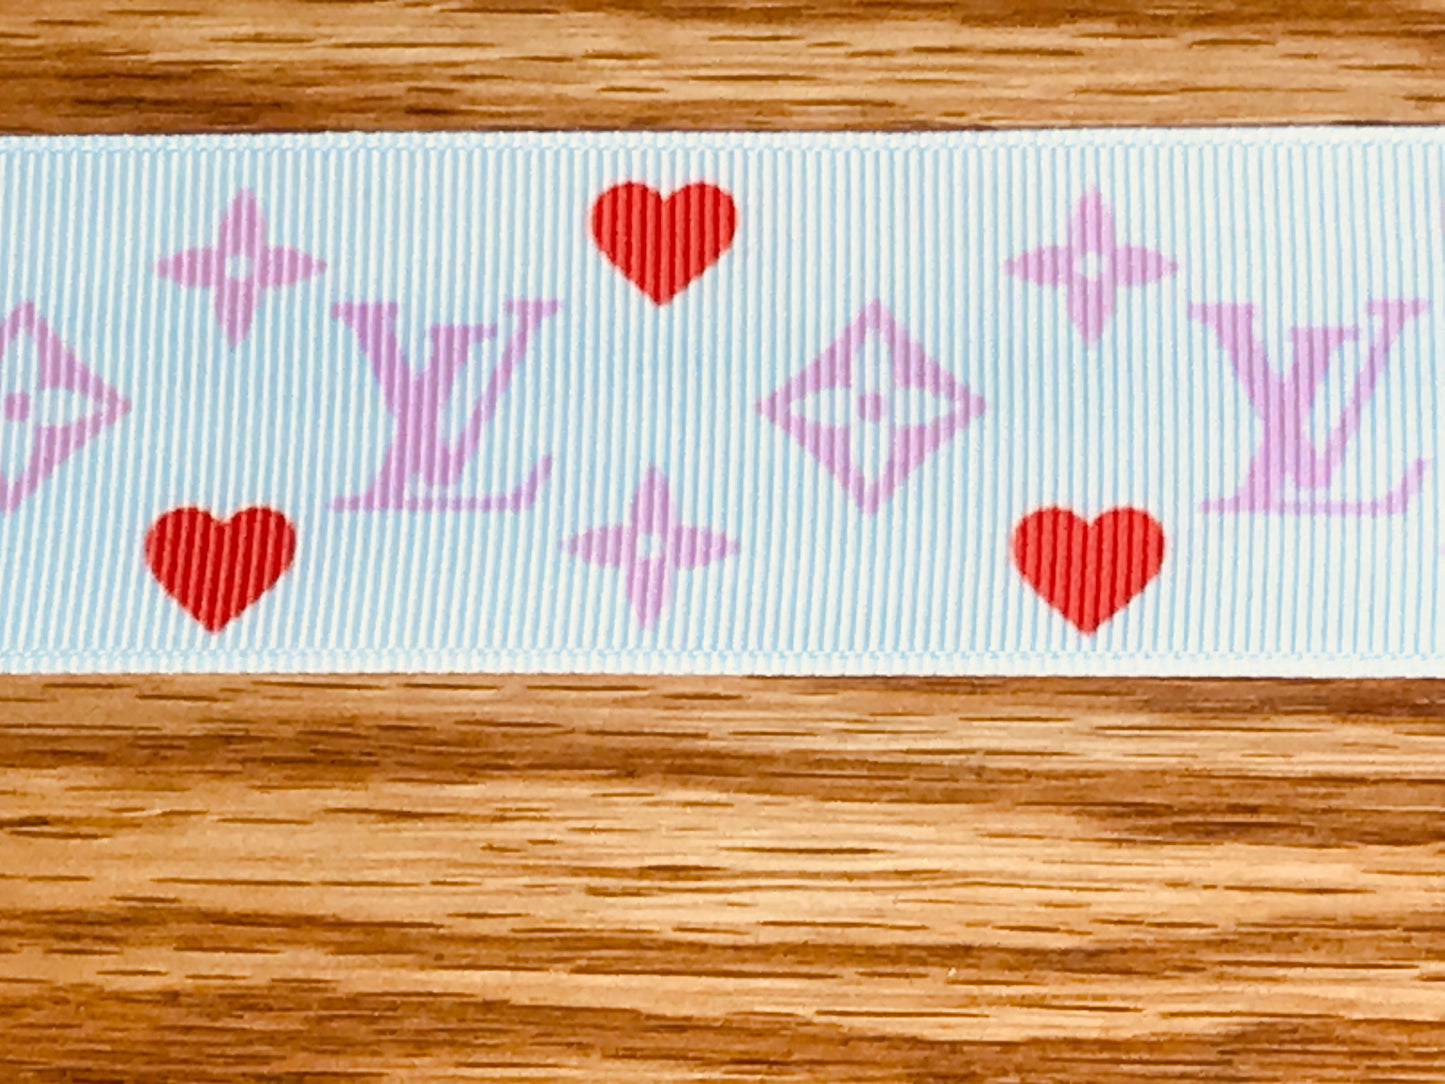 1-1/2" Wide Famous Designer LV Louis Vuitton Logo With Hearts Valentine's Day Love Grosgrain Ribbon